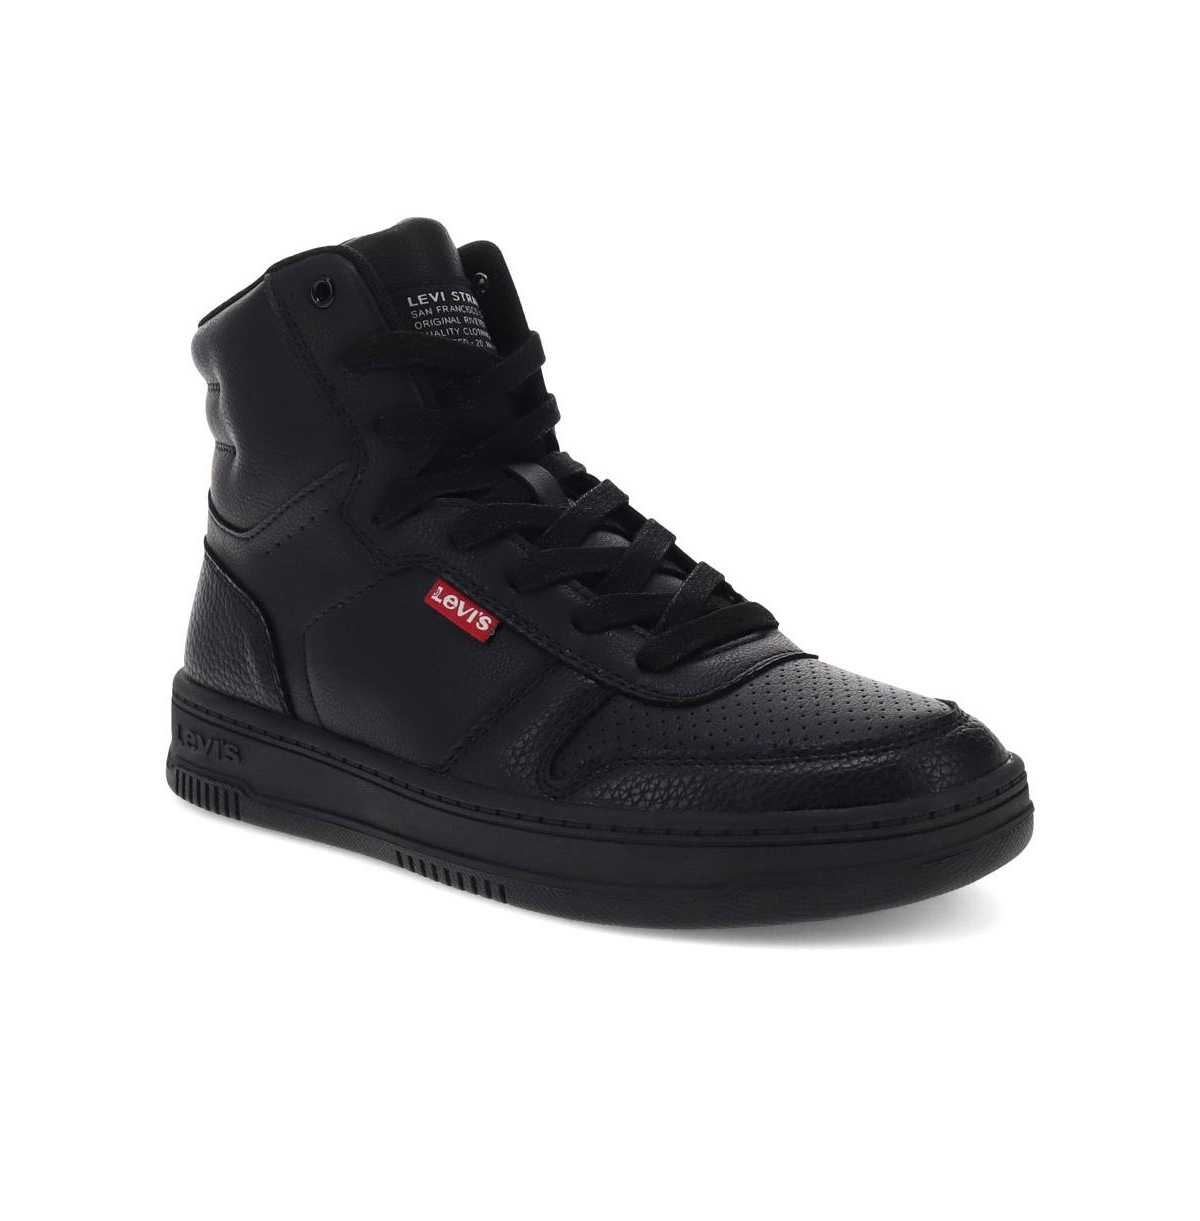 Levi's Women's Drive Hi Synthetic Leather Casual High-top Sneaker Shoe In Black Mono